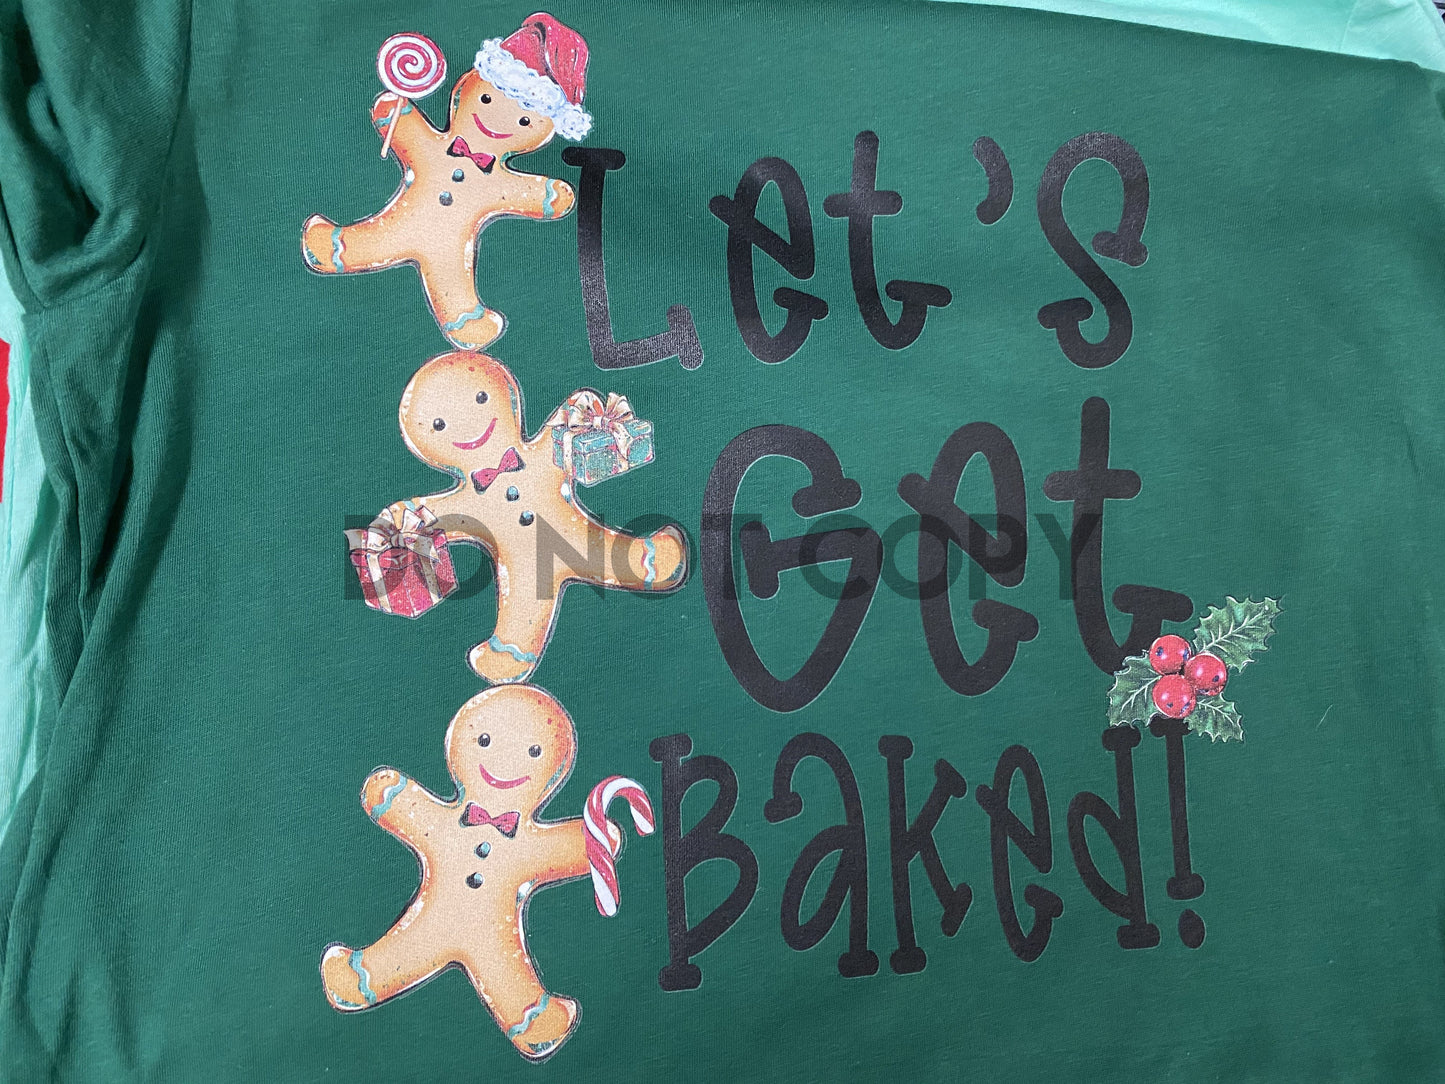 Let’s get baked gingerbread man cookie Christmas treats HIGH HEAT Full color Screen Print transfer